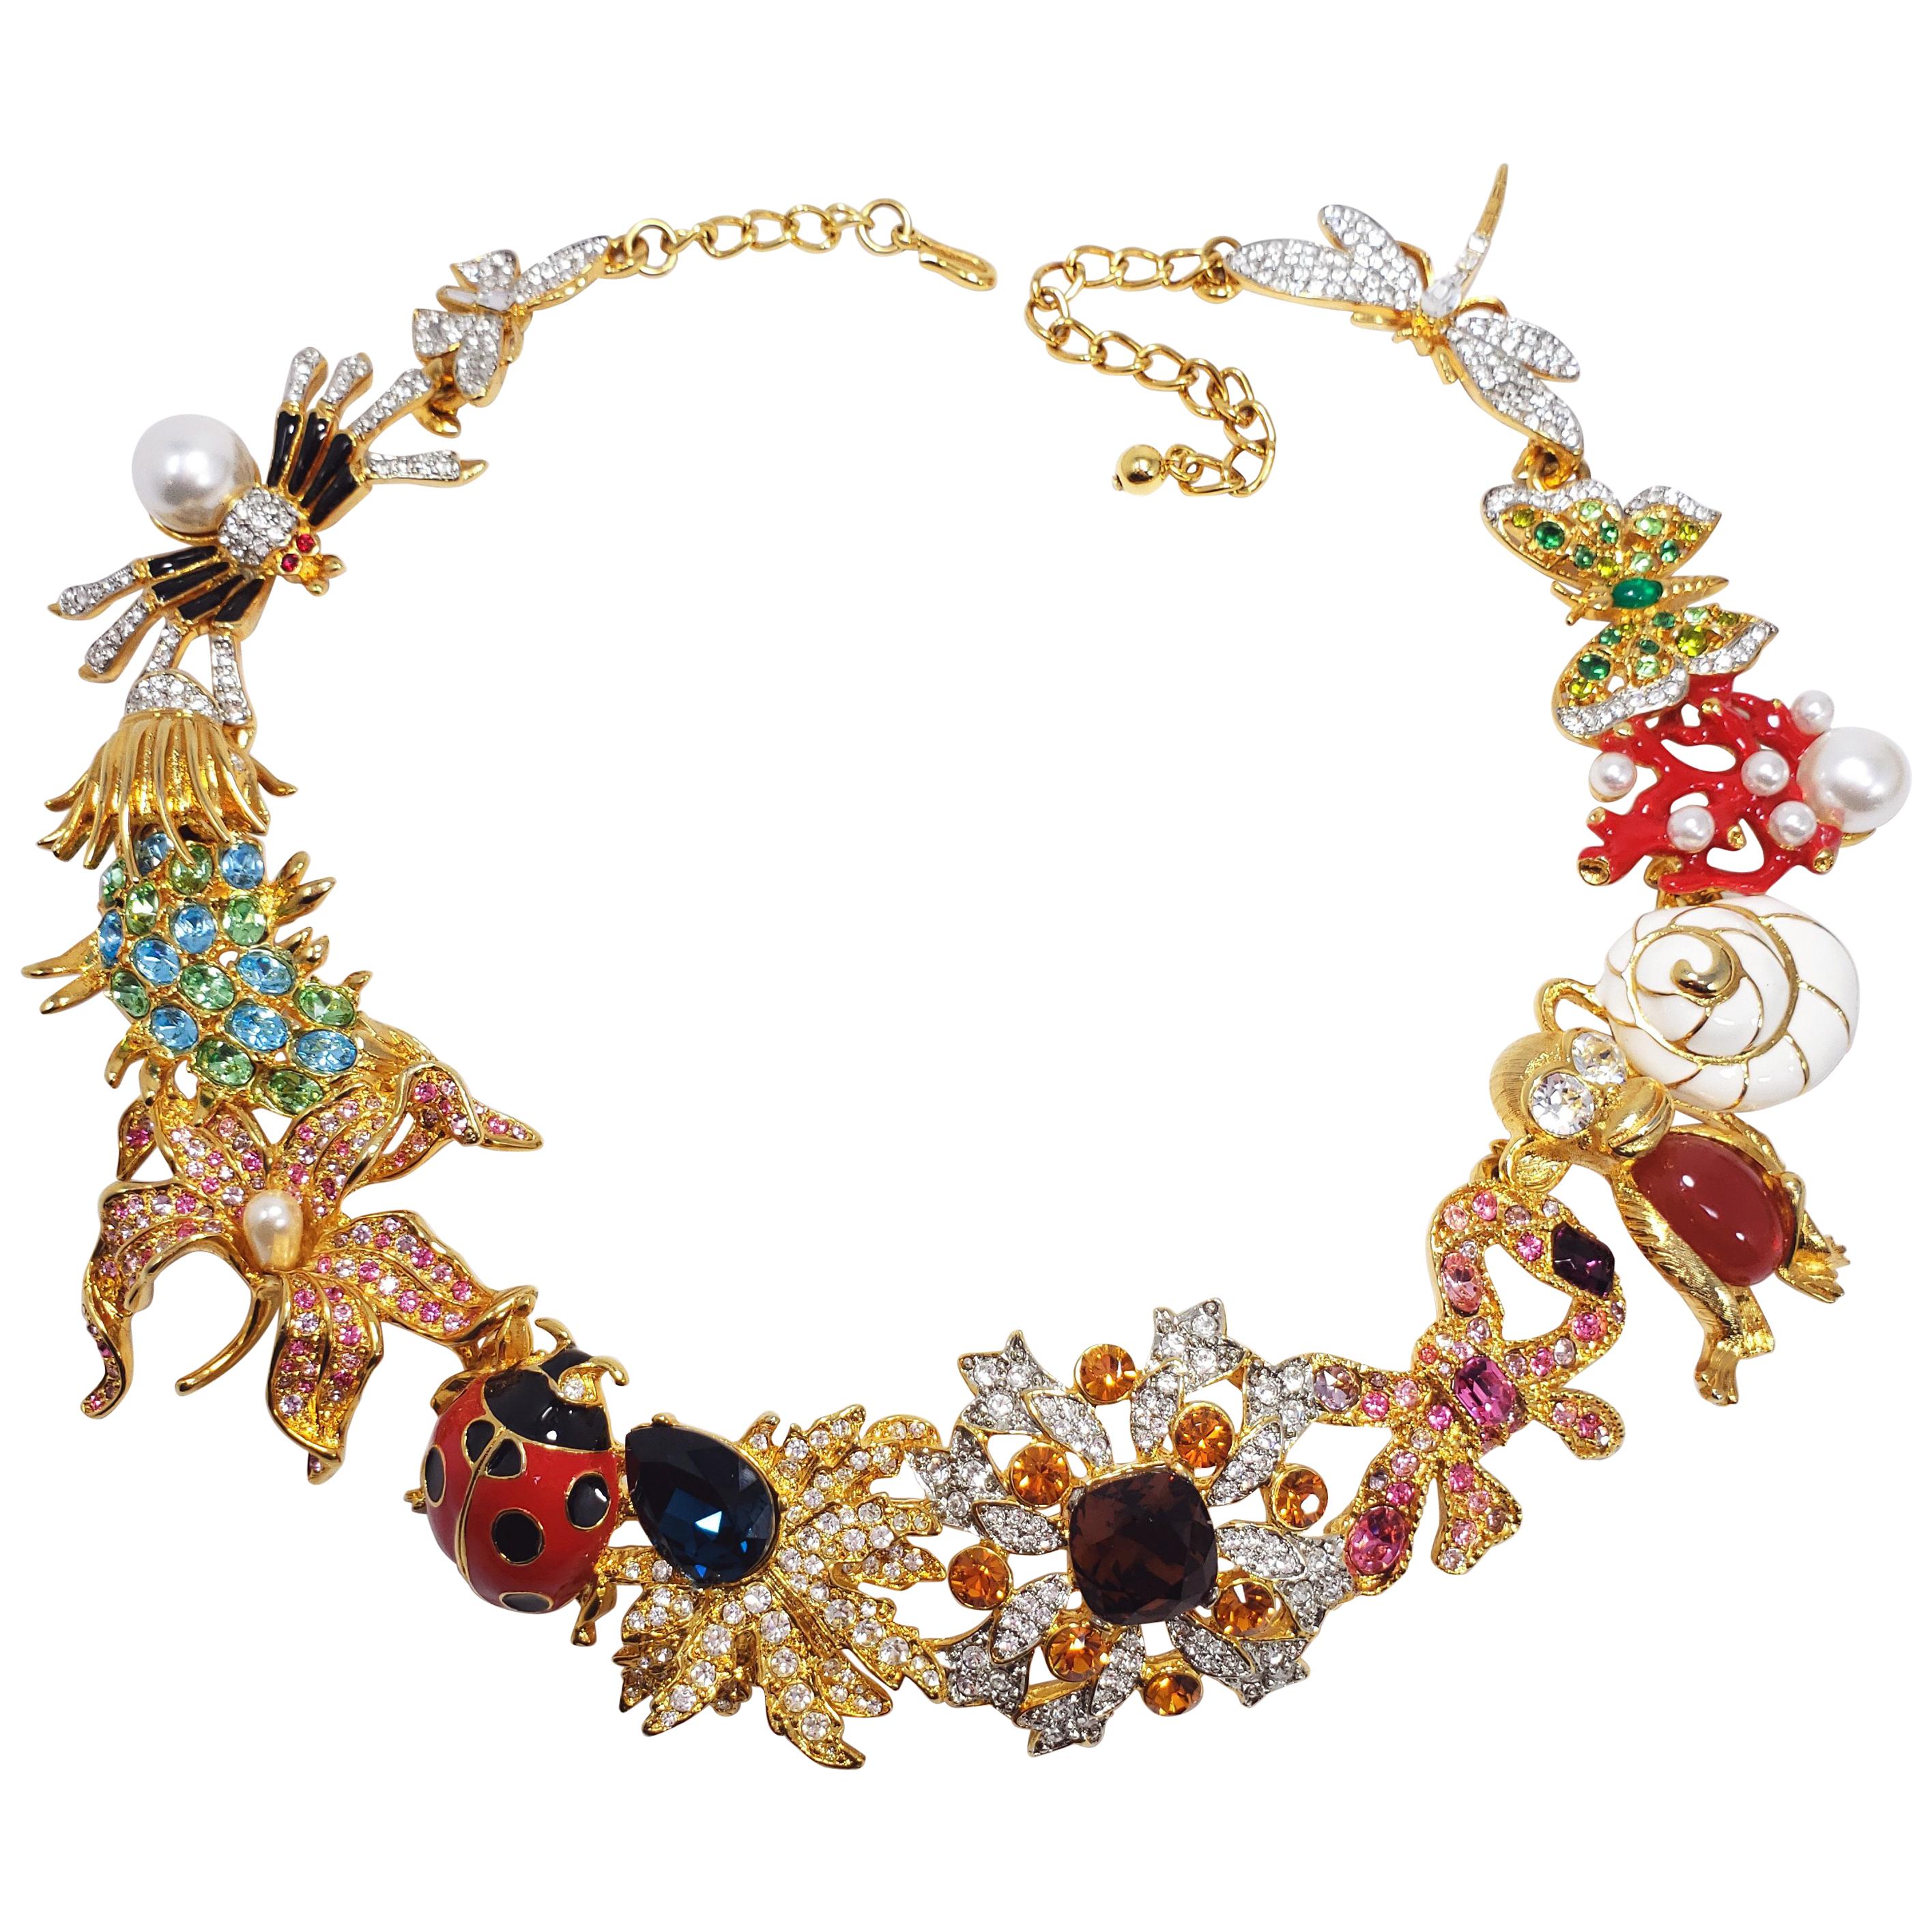 Kenneth Jay Lane Ornate Colorful Crystal Kaleidoscope Collar Necklace in Gold